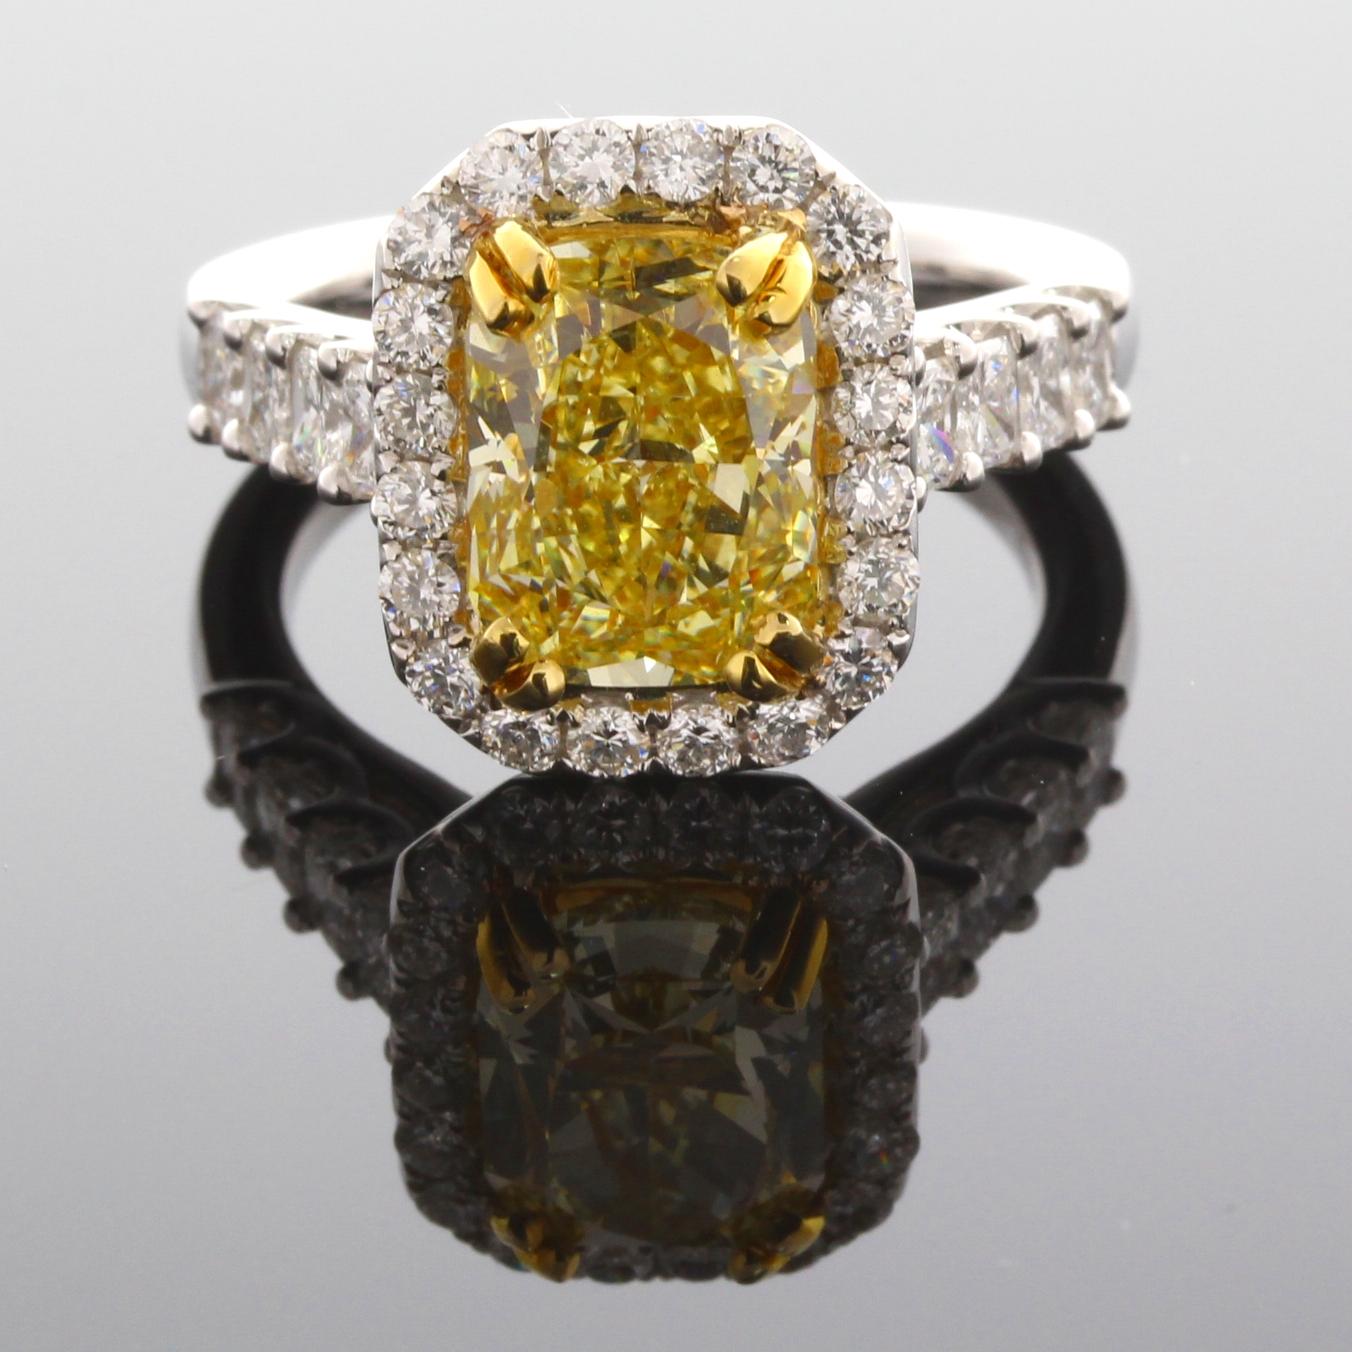 Incredible Deal on GIA Certified 3.55 Carat Elongated Cushion Cut, Natural Fancy Intense Yellow Even, VS2 Clarity, Diamond Ring, measuring 9.98-7.73x5.33. GIA Certificate #5191602263. 
Total Carat Weight on the ring is 4.95. 
This exquisite mounting